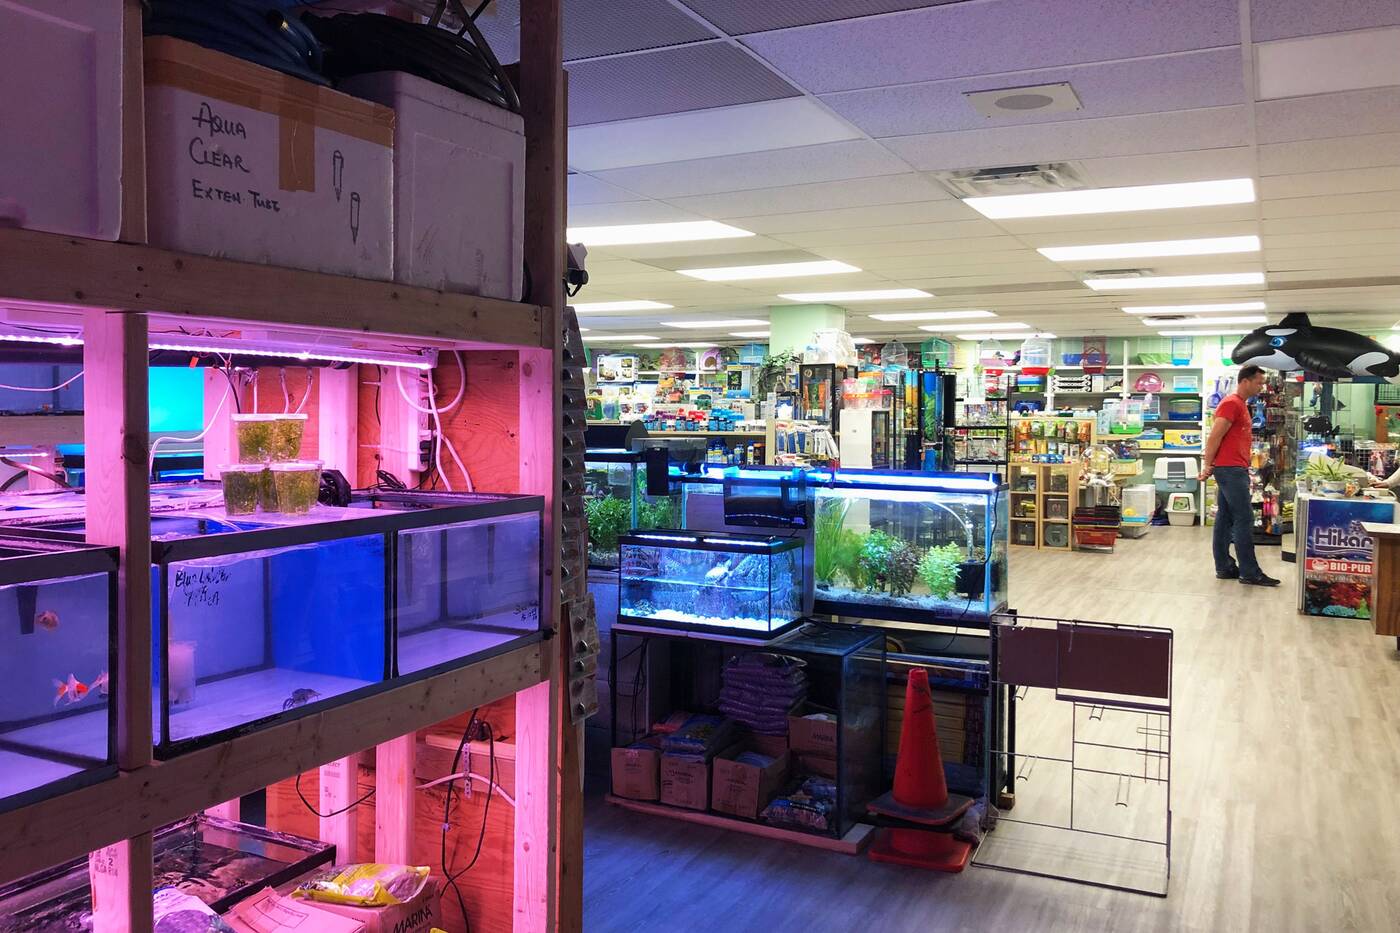 Toronto's most famous pet store and aquarium just reopened